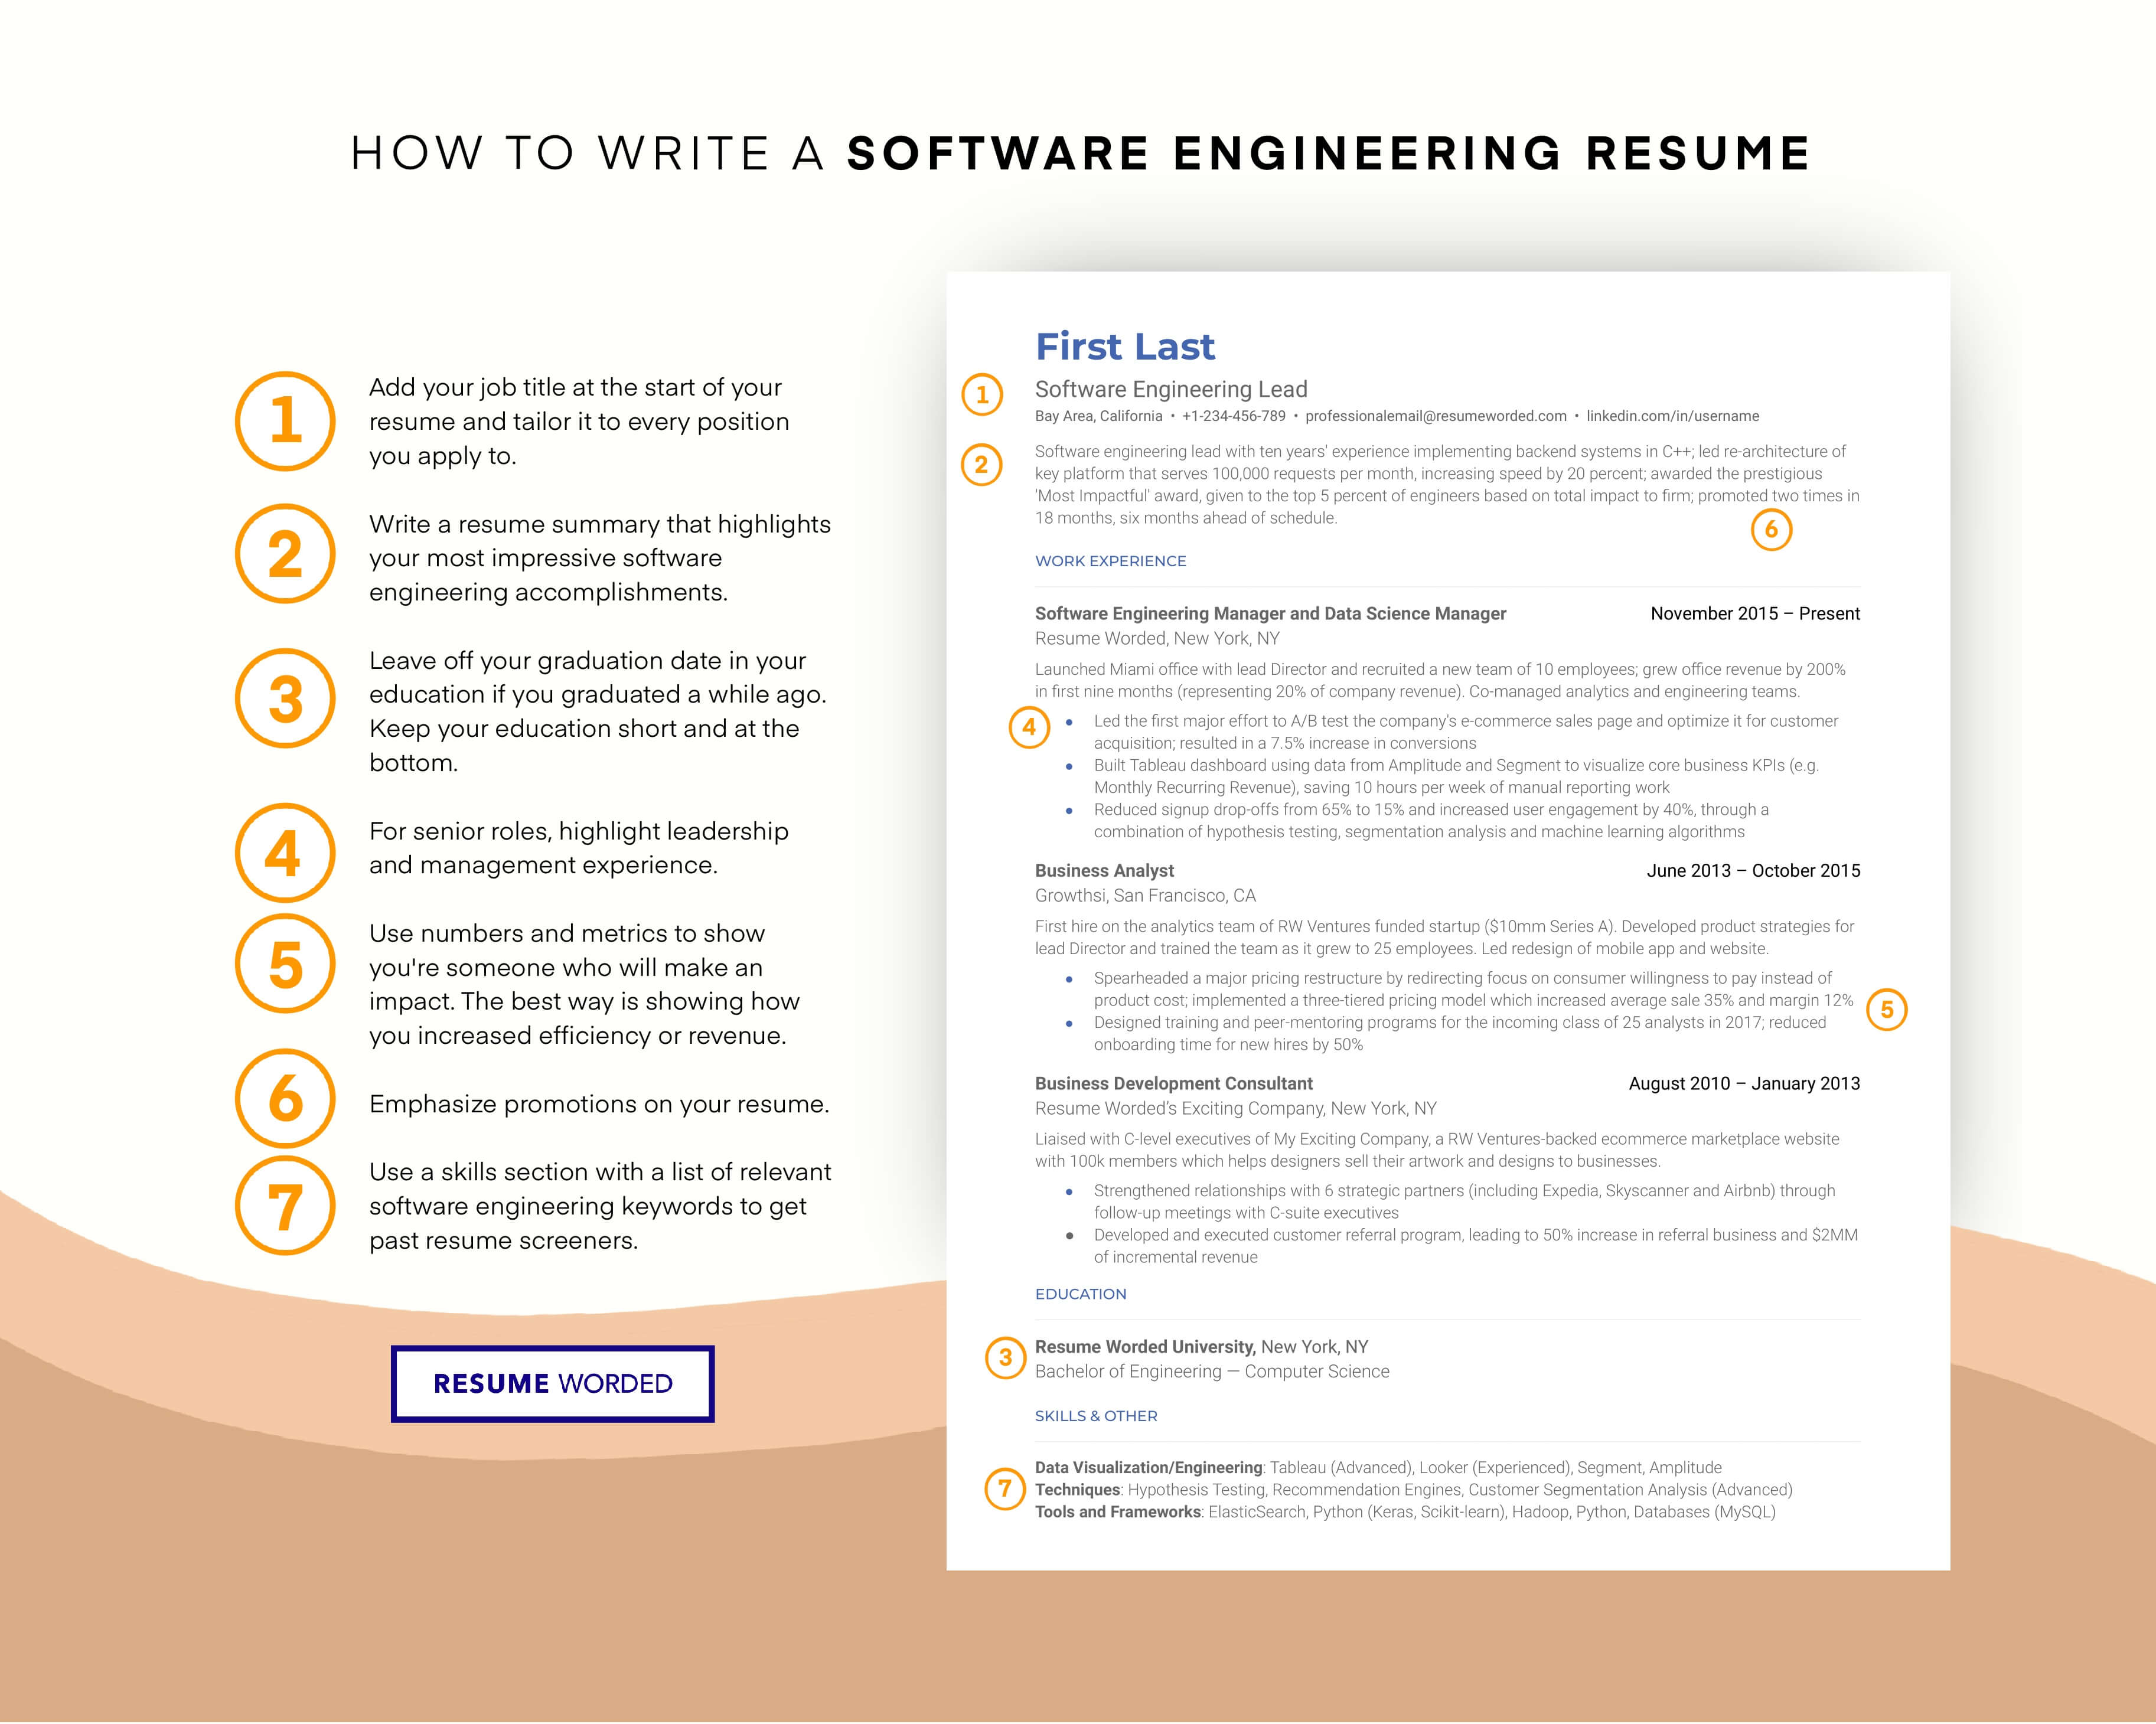 Mention the programming languages you are proficient at. - Software Developer Resume